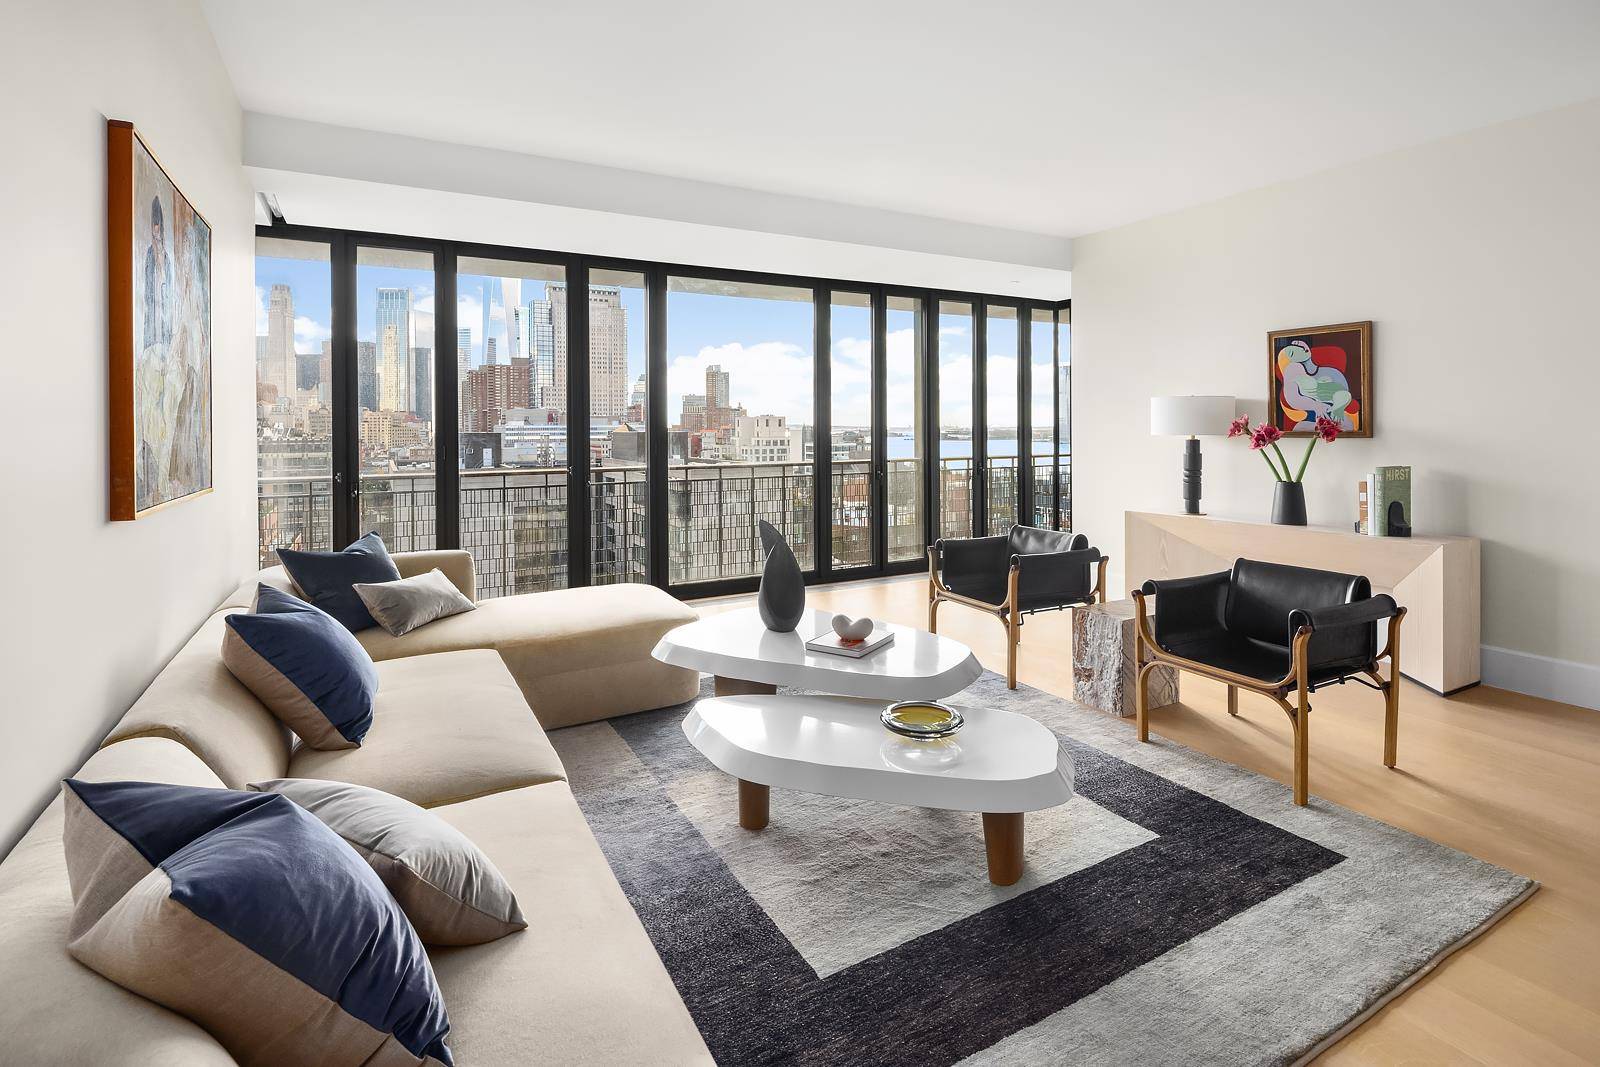 Emerging as a rare vertical sight in historic Hudson Square, the 25 story 100 Vandam, designed by the pioneering COOKFOX Architects, effortlessly melds the old and the new with its ...